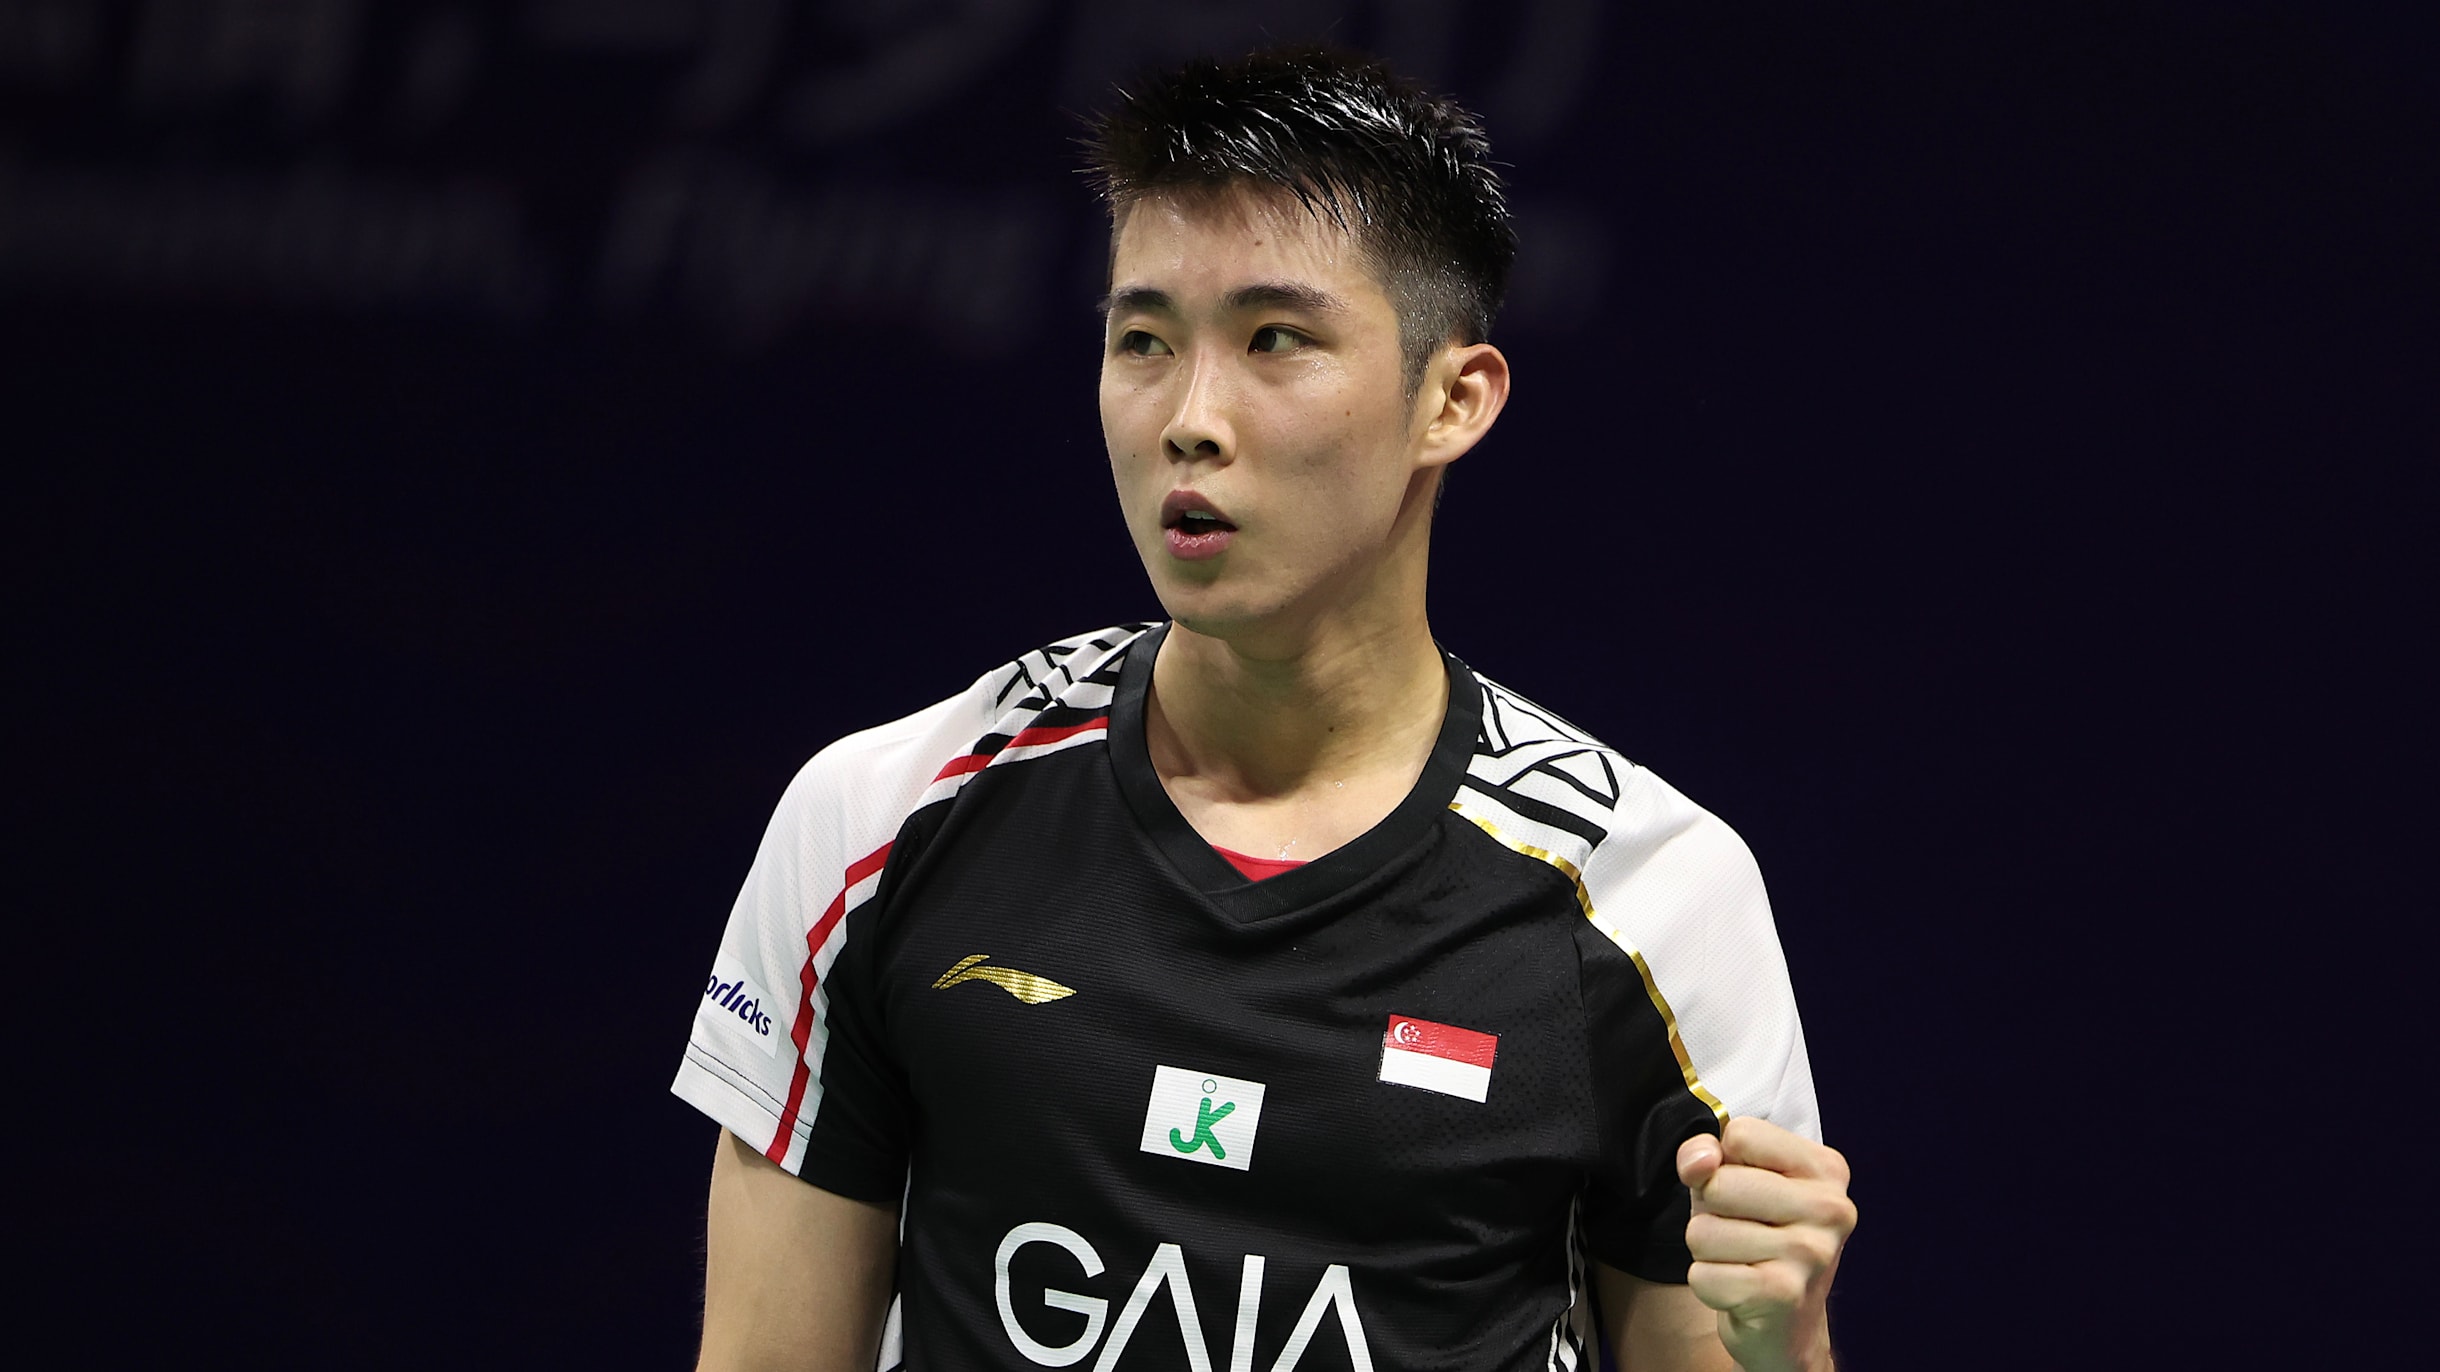 Singapore Open 2023 badminton How to watch Loh Kean Yew live in action at home